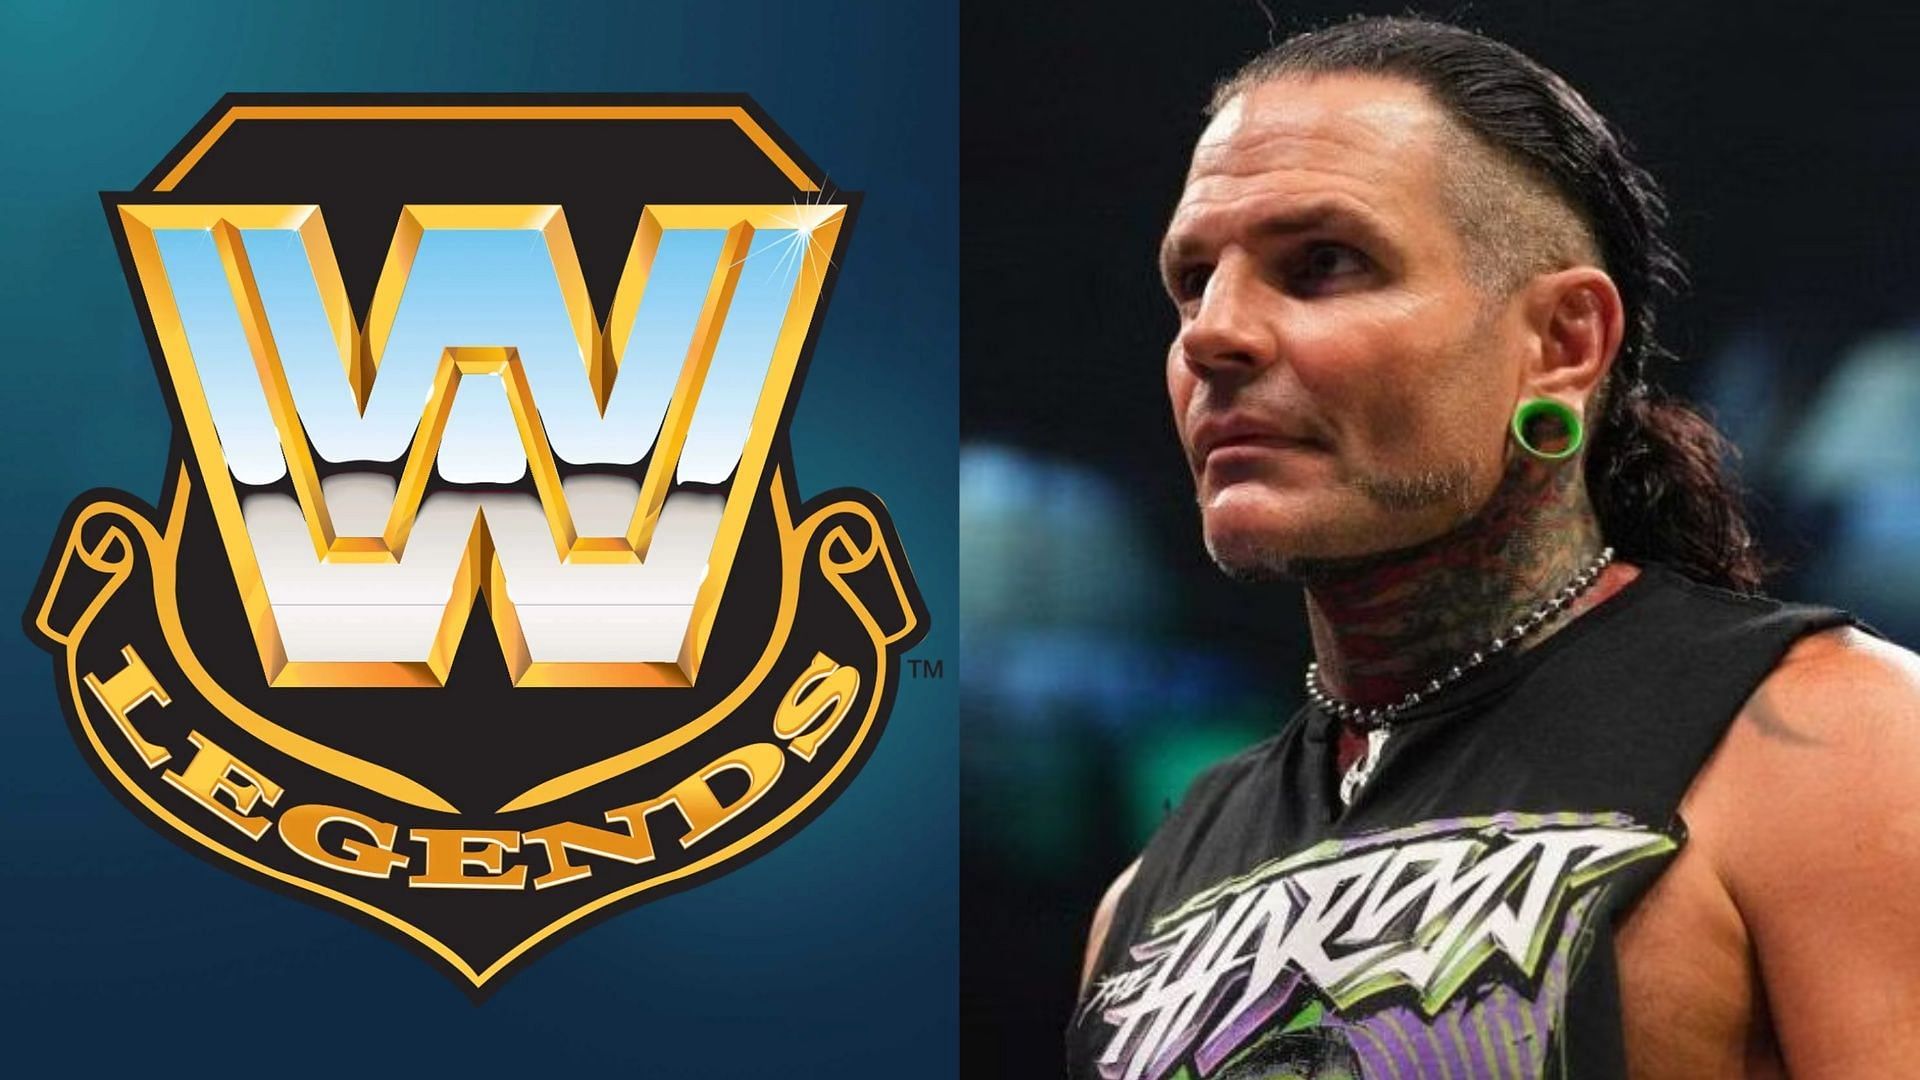 Jeff Hardy had an awkward encounter with fans at the airport.